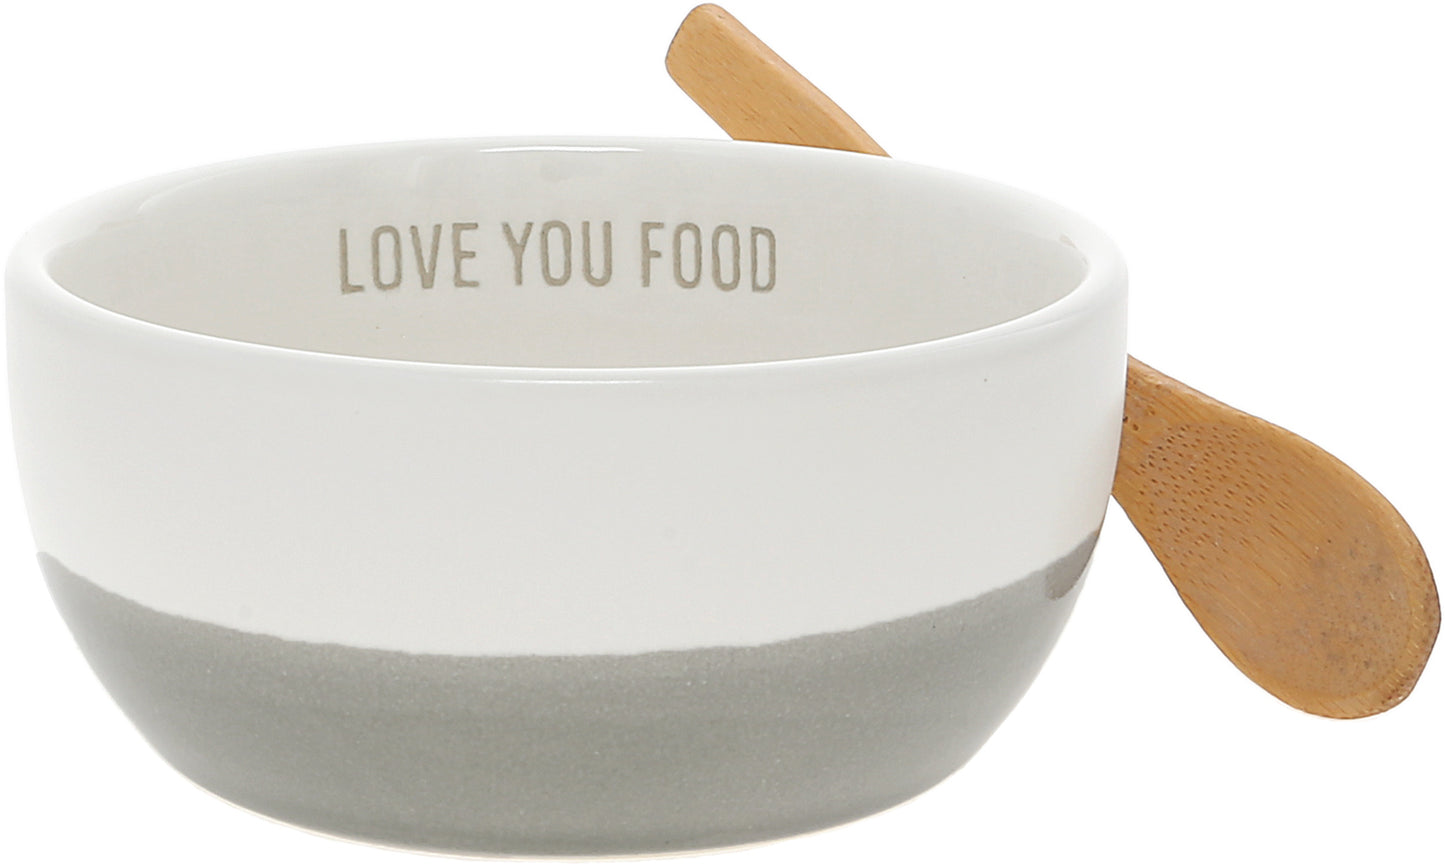 Love You Food - 4.5" Ceramic Bowl with Bamboo Spoon